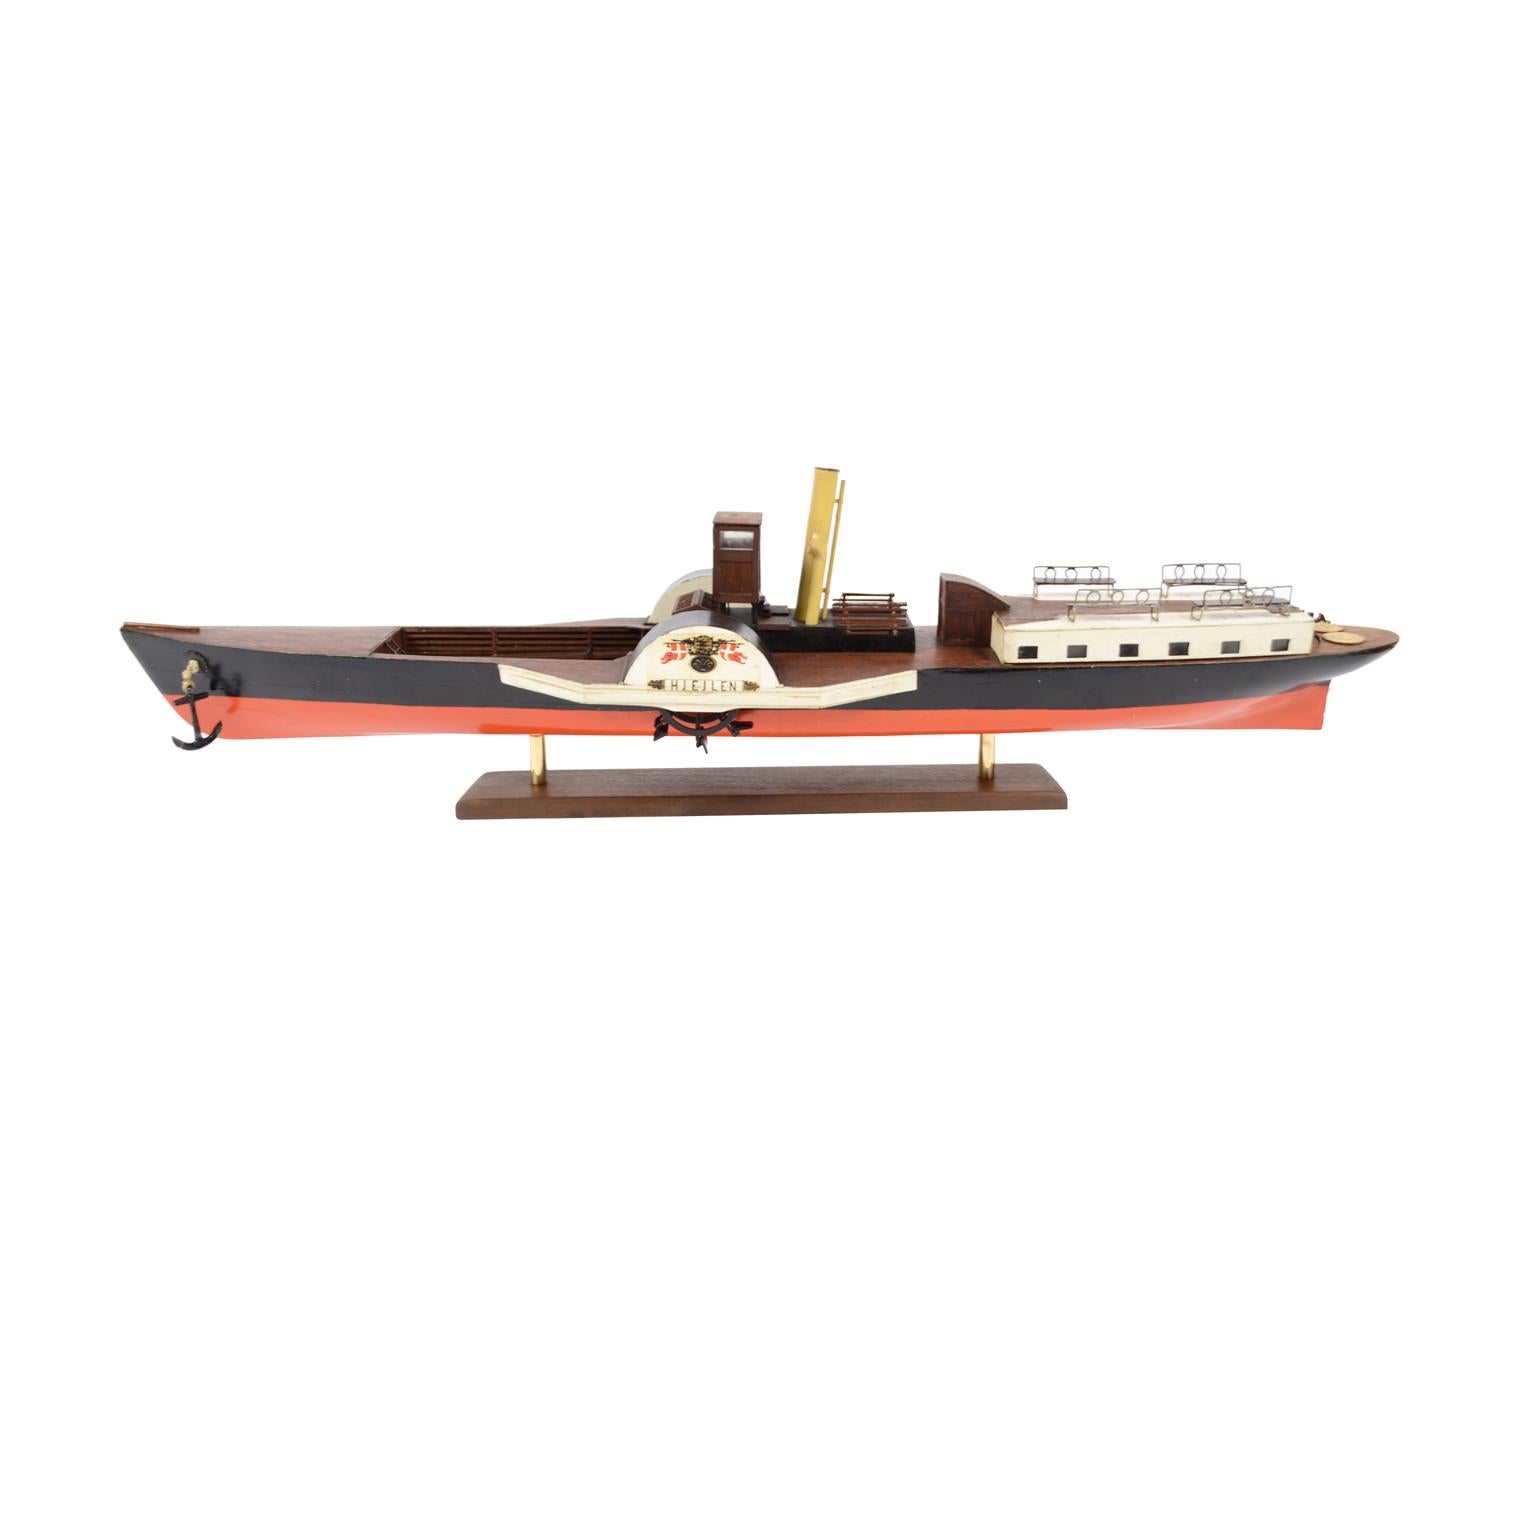 Model of the Danish steamer Hjejlen, the oldest original coal steamer in the world, still operating from May to September from Silkeborg to Himmelbjerget. Partly painted mahogany planking hull, red hull, black topsides. The steamer was commissioned